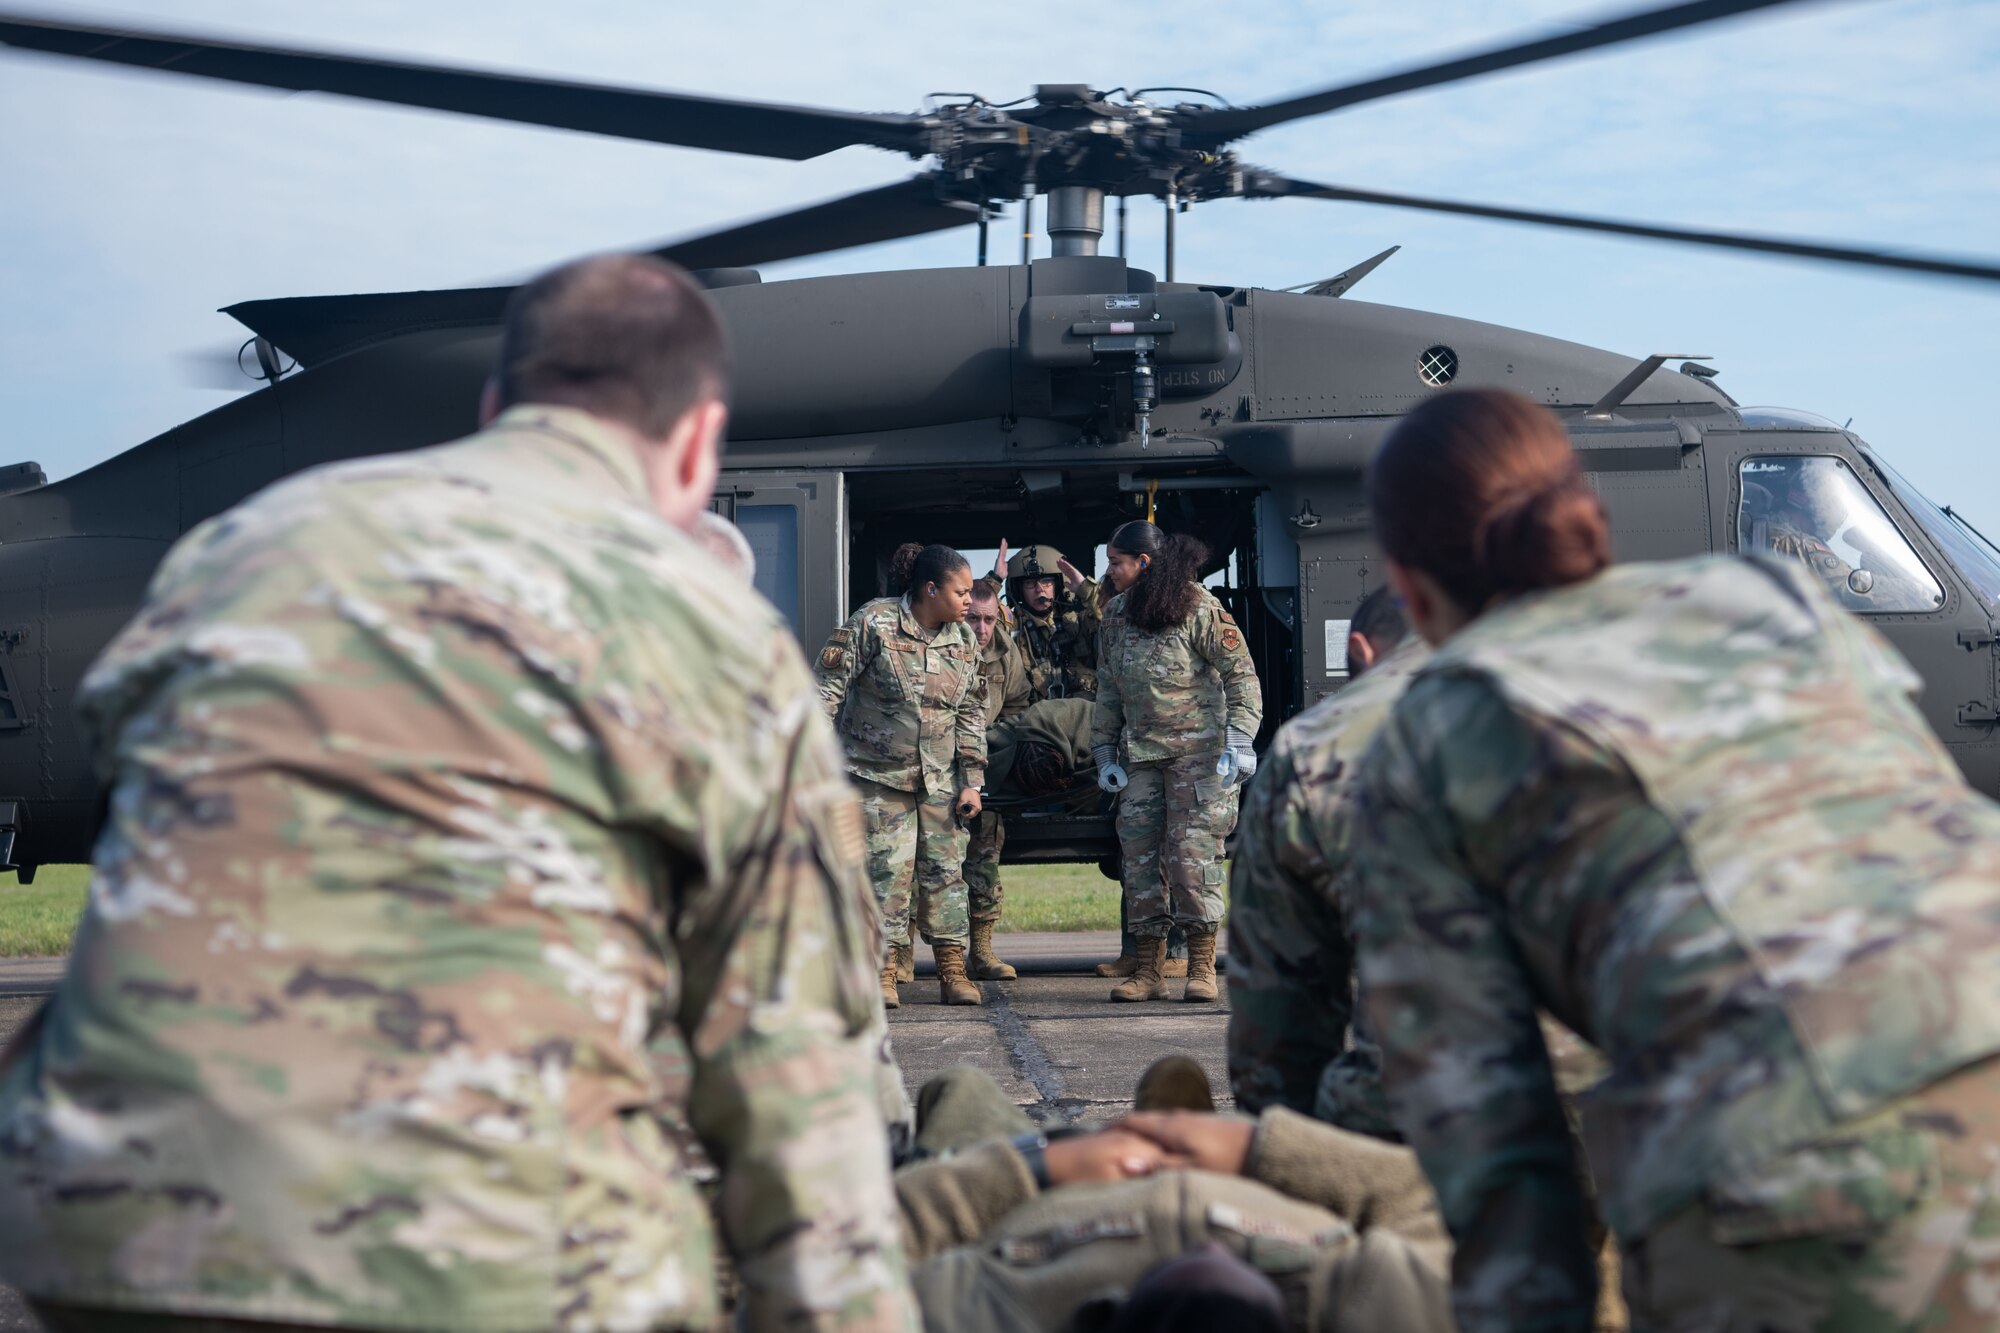 Airmen escort a person onto a helicopter at Maxwell Air Force Base, March 16, 2023. During the helicopter portion of the training, some of the Army’s non-commissioned officers taught Airmen how to escort a patient onto the helicopter while it was running.